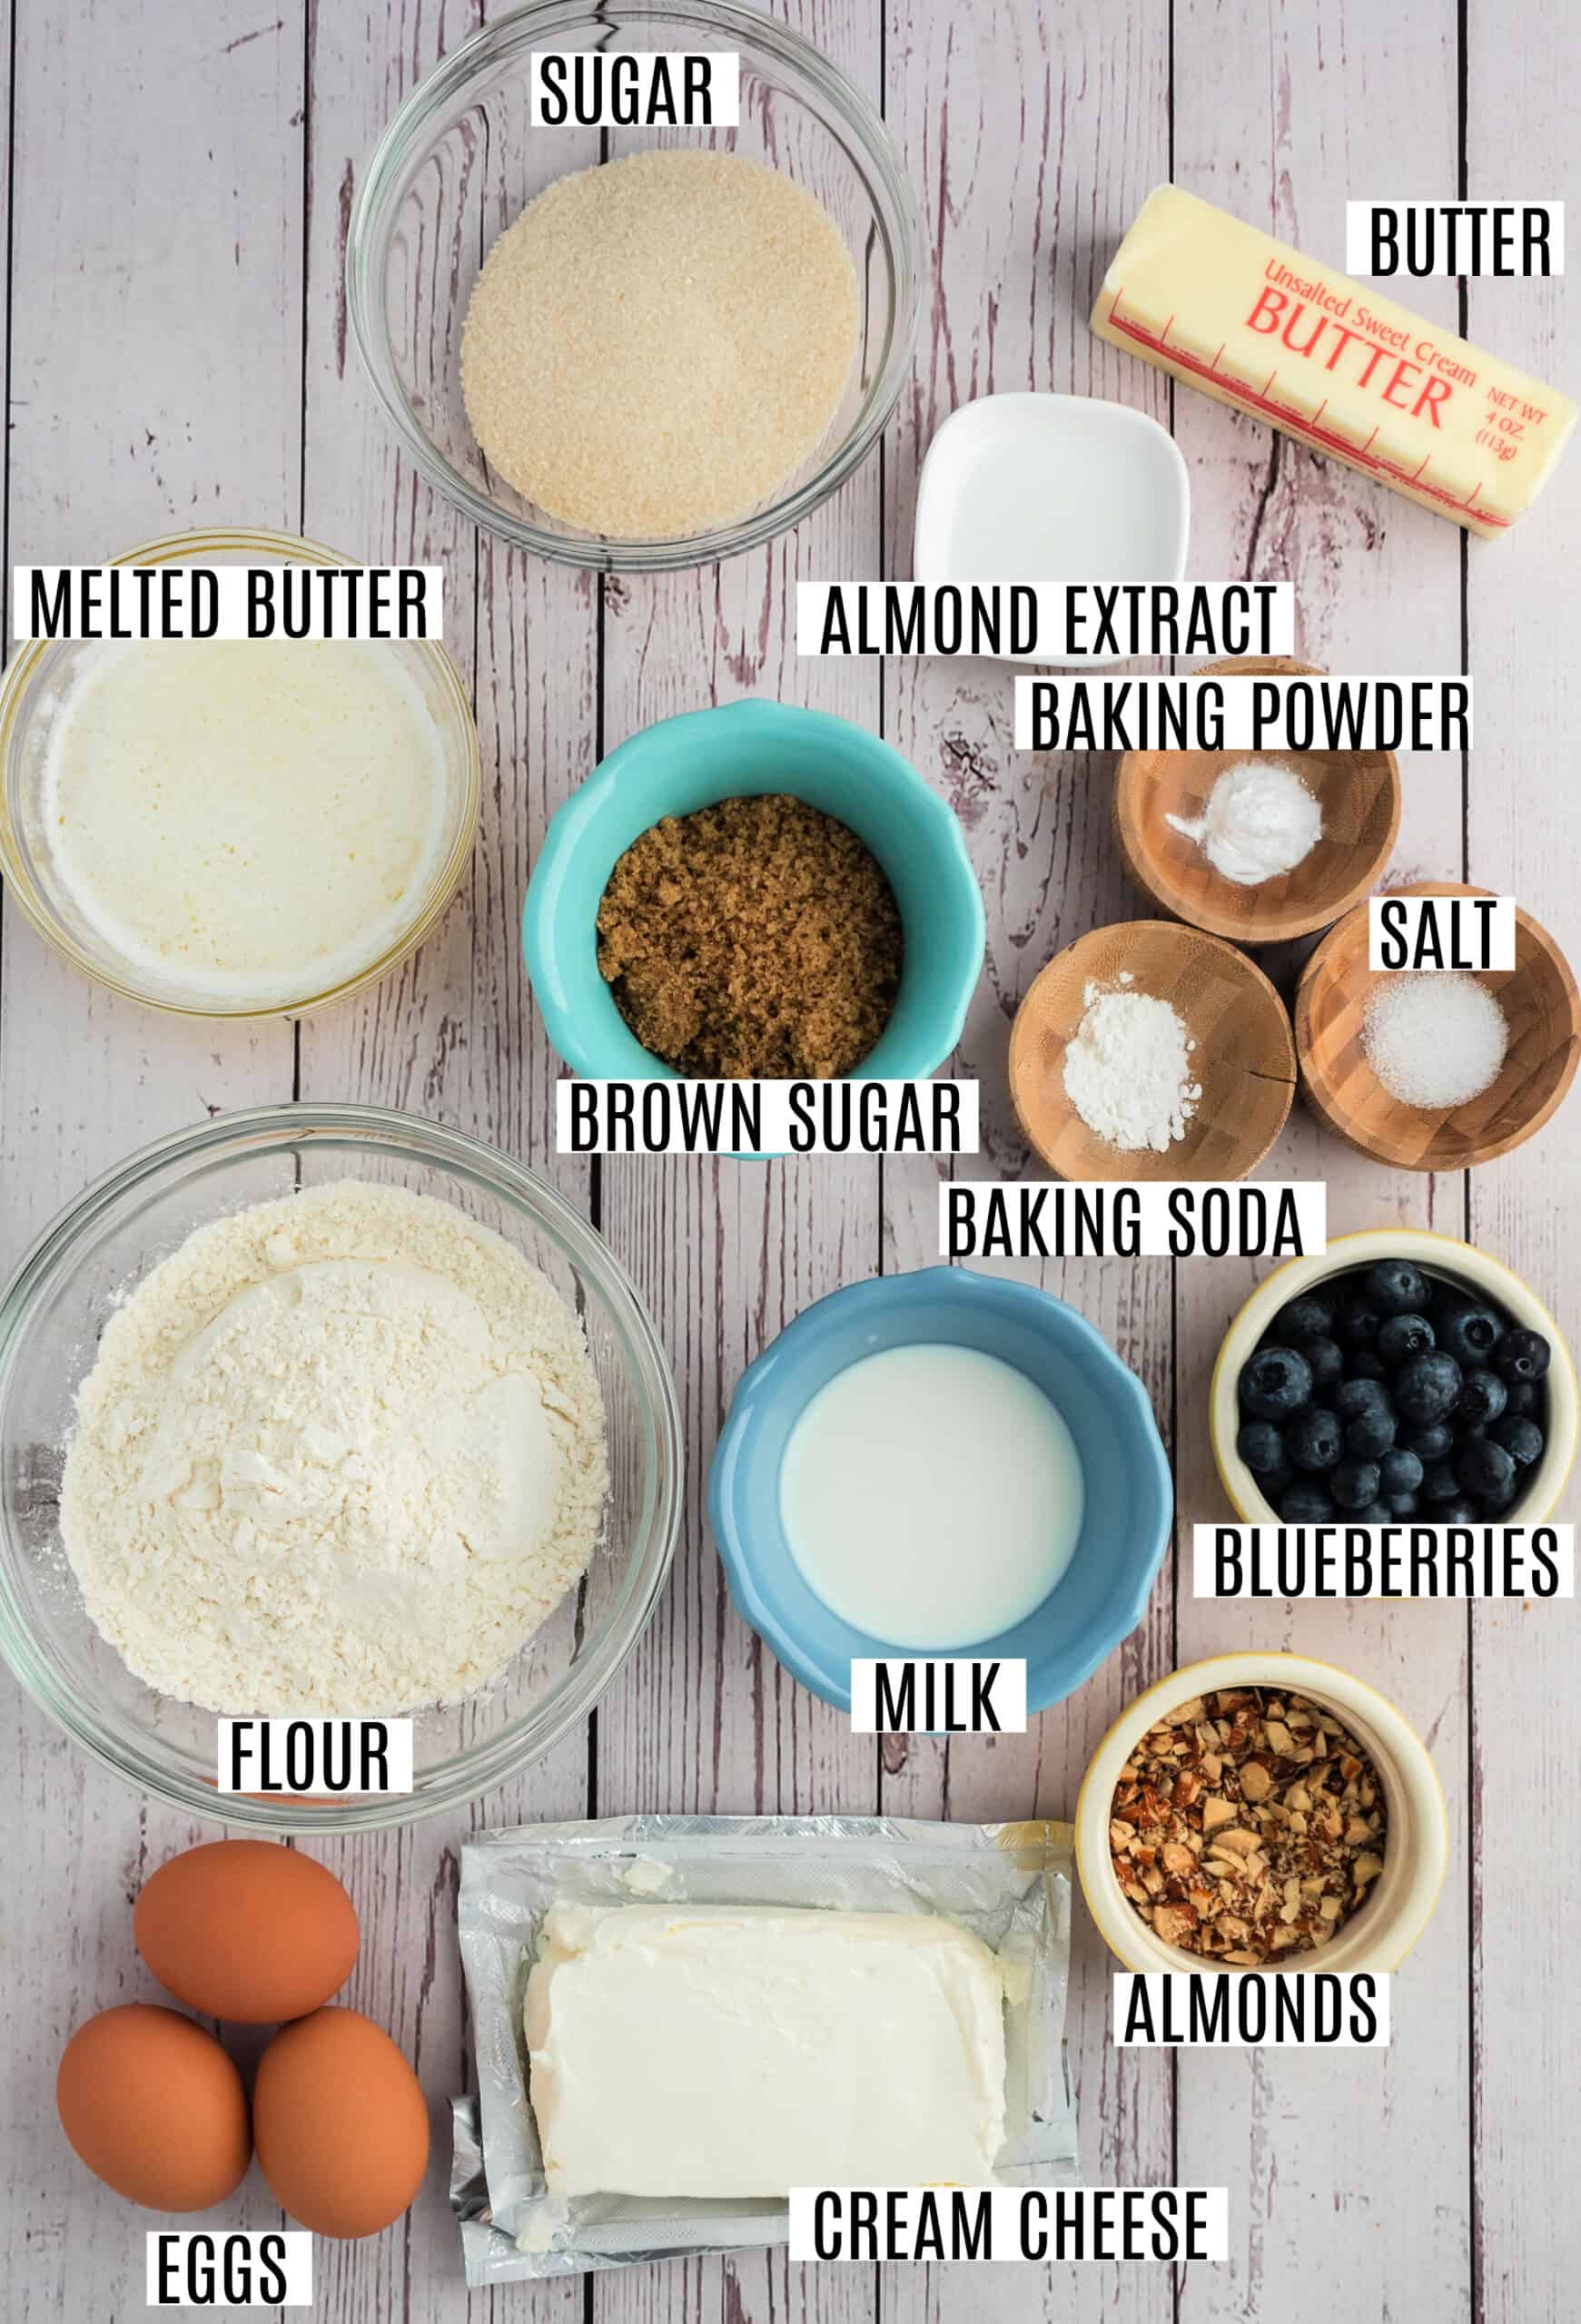 Ingredients needed to make blueberry coffee cake.